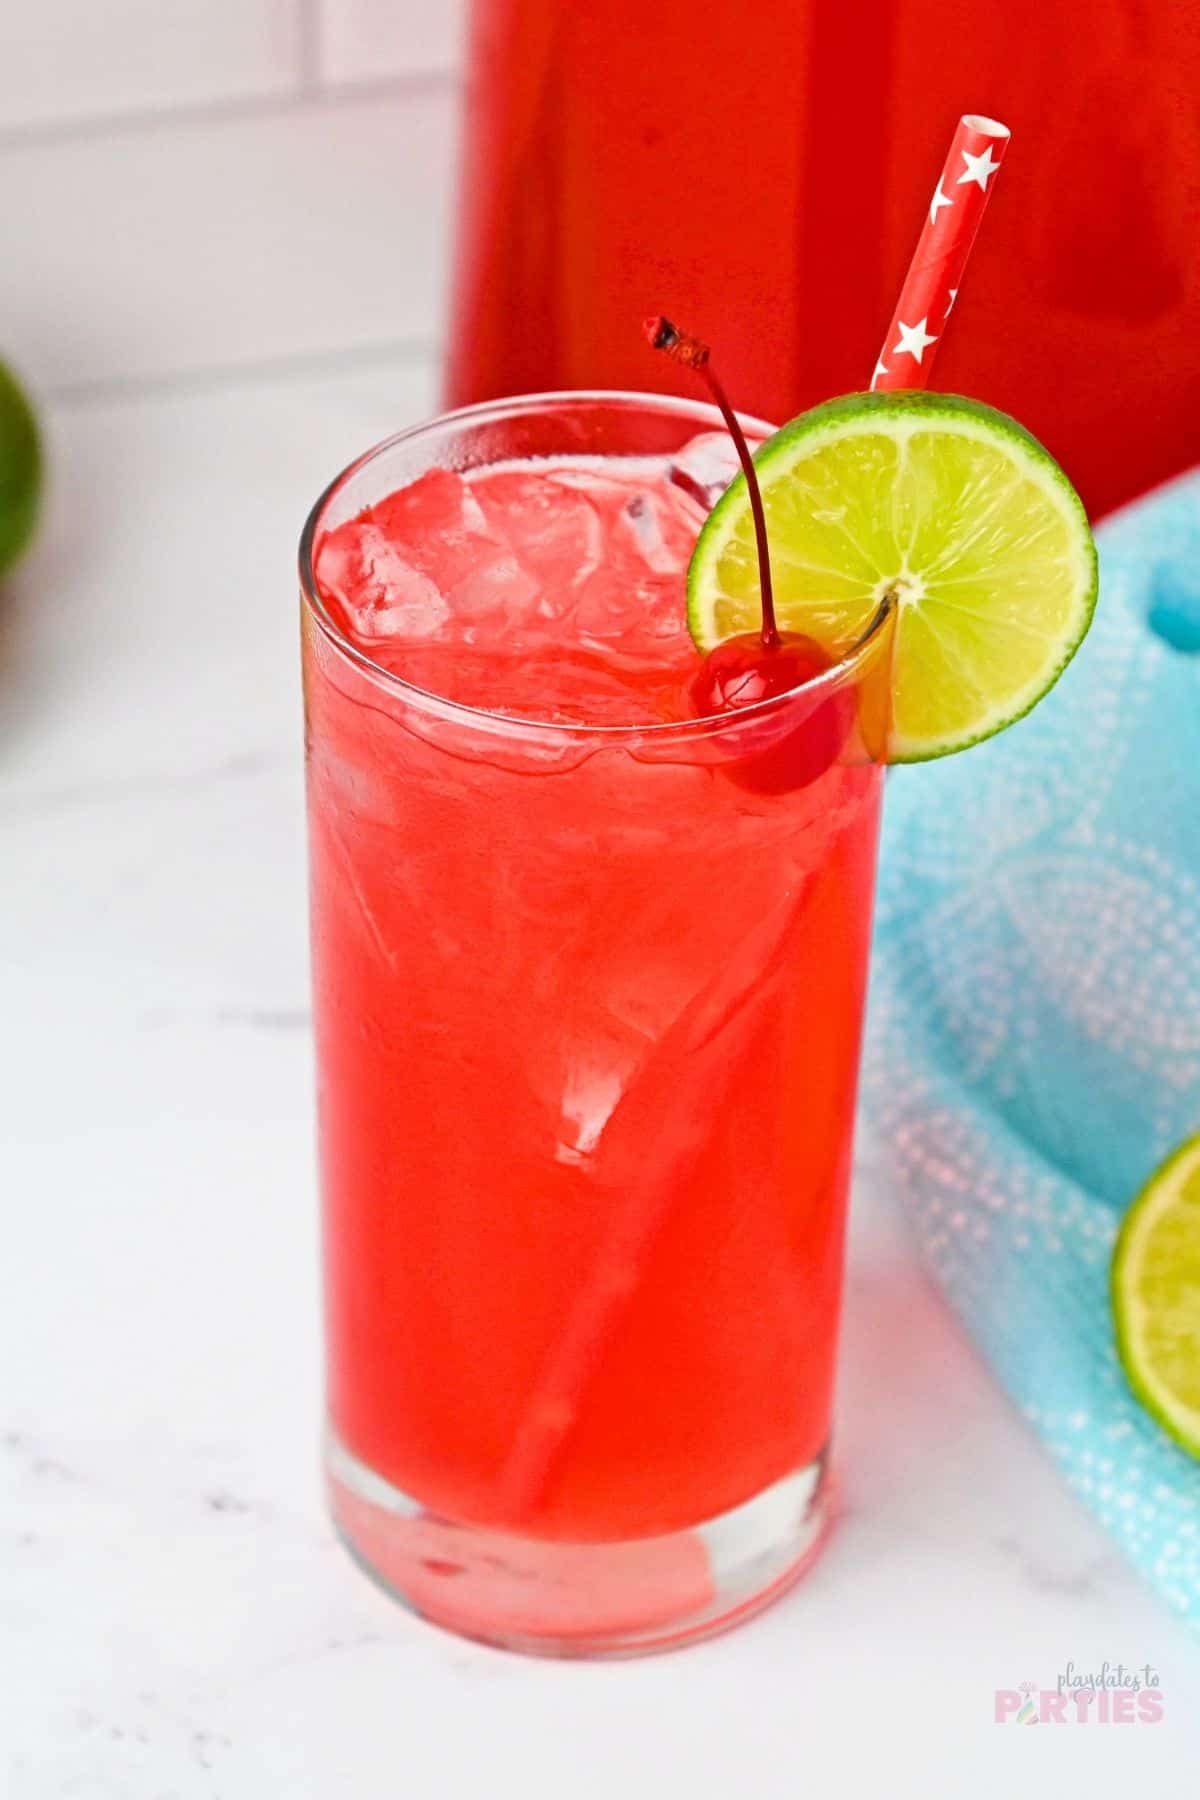 A red drink garnished with a cherry and a lime.